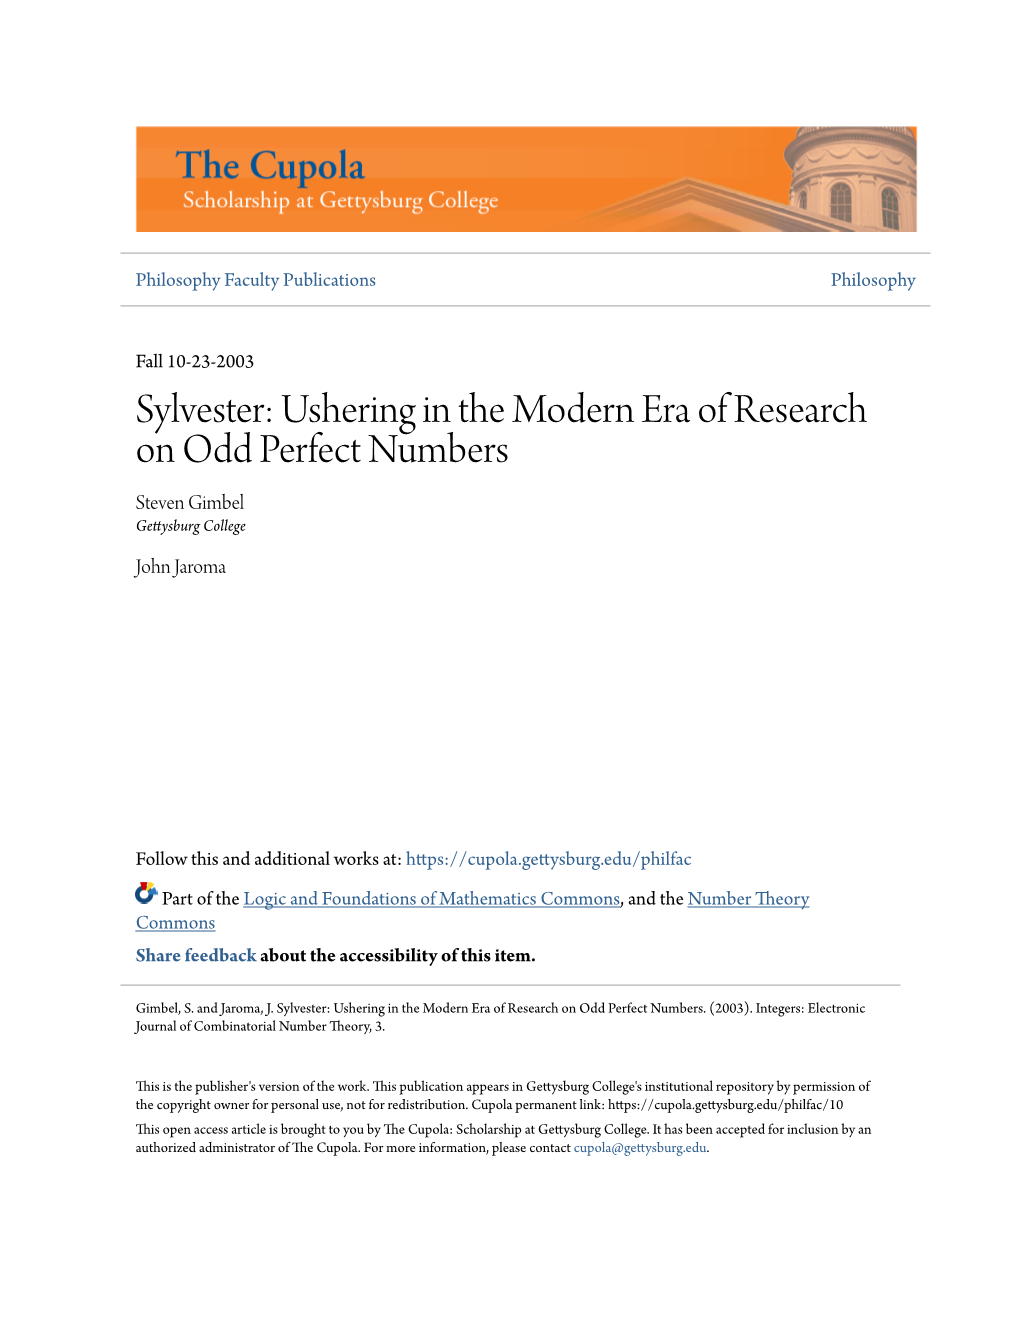 Sylvester: Ushering in the Modern Era of Research on Odd Perfect Numbers Steven Gimbel Gettysburg College